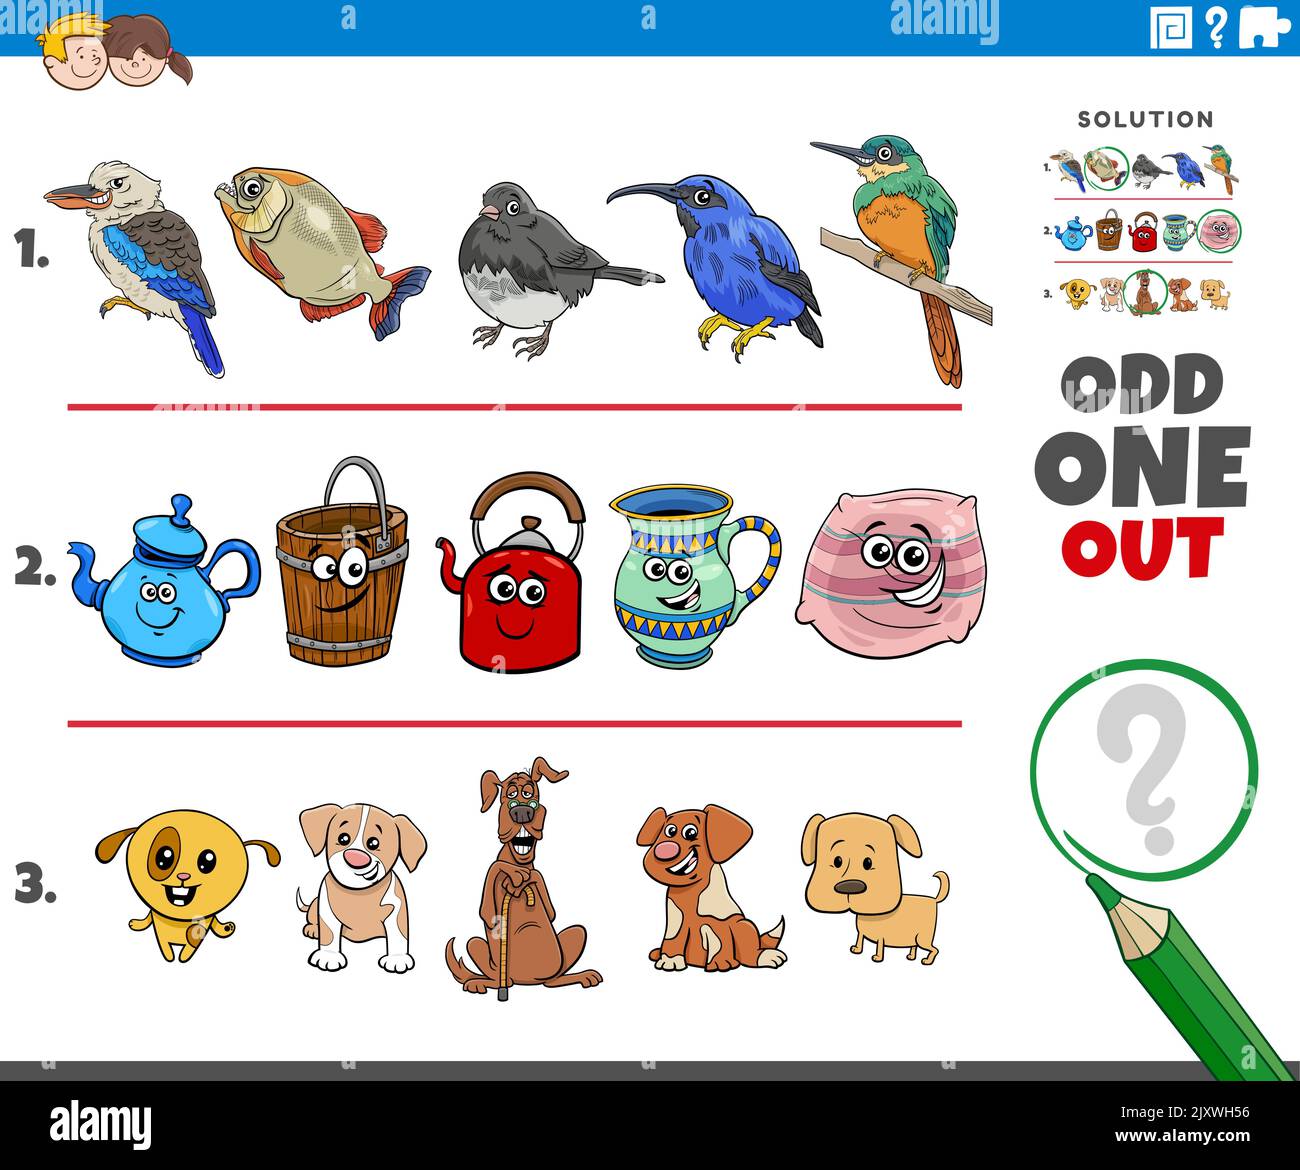 Cartoon illustration of odd one out picture in a row educational activity for children with comic animal characters and objects Stock Vector